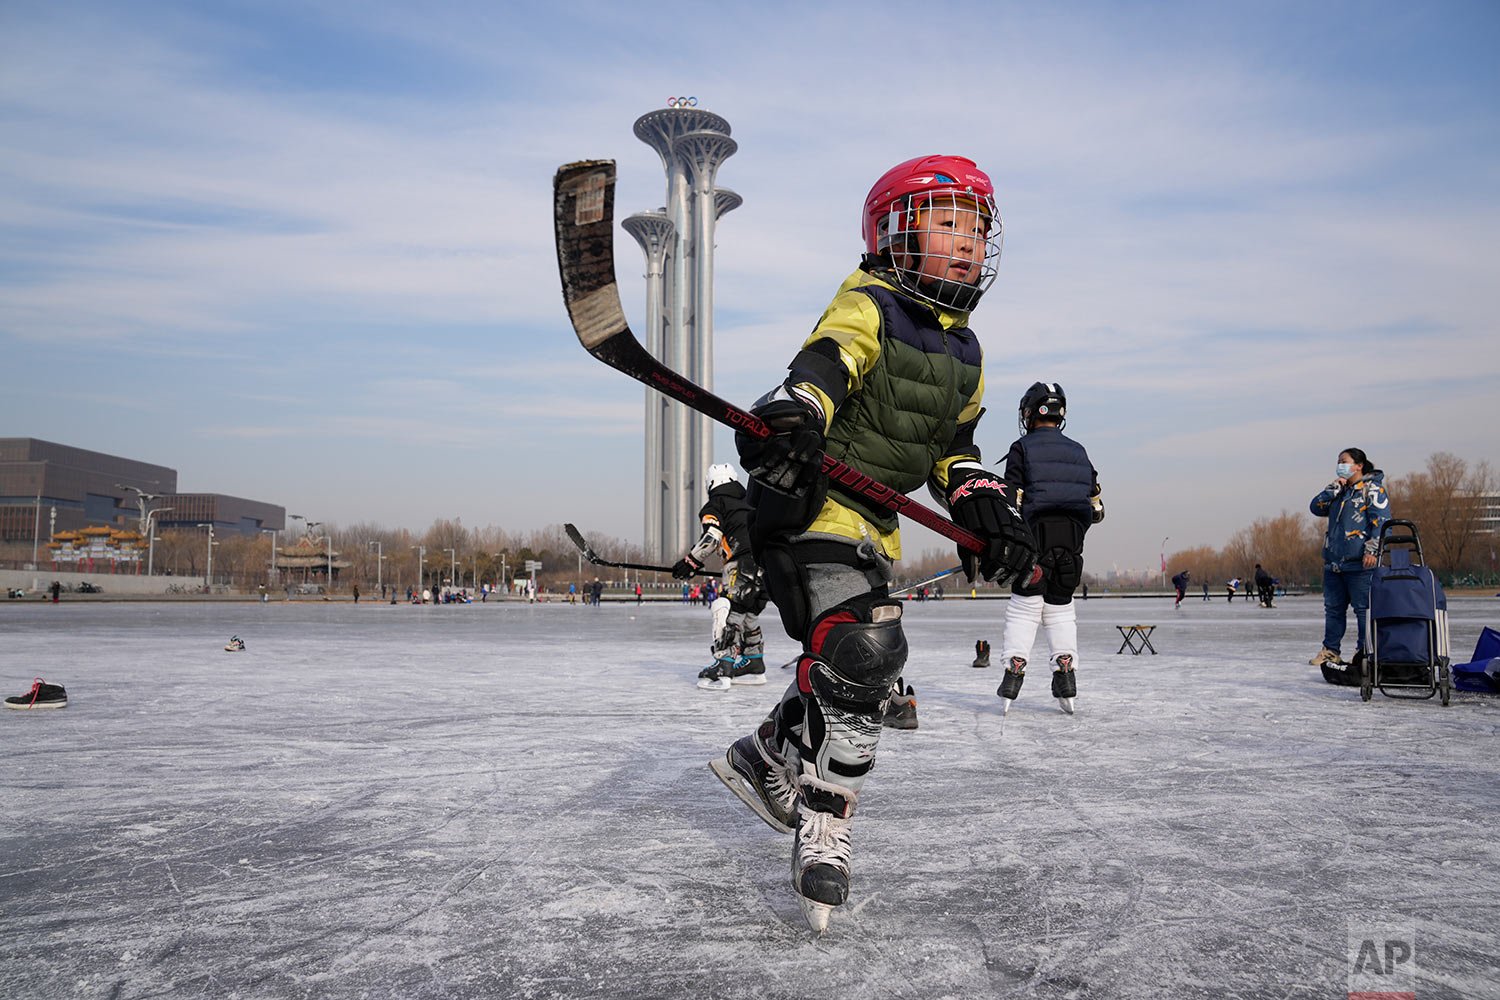  A child practices ice hockey near the Beijing Olympics Tower in Beijing, China, Tuesday, Jan. 18, 2022. (AP Photo/Ng Han Guan) 